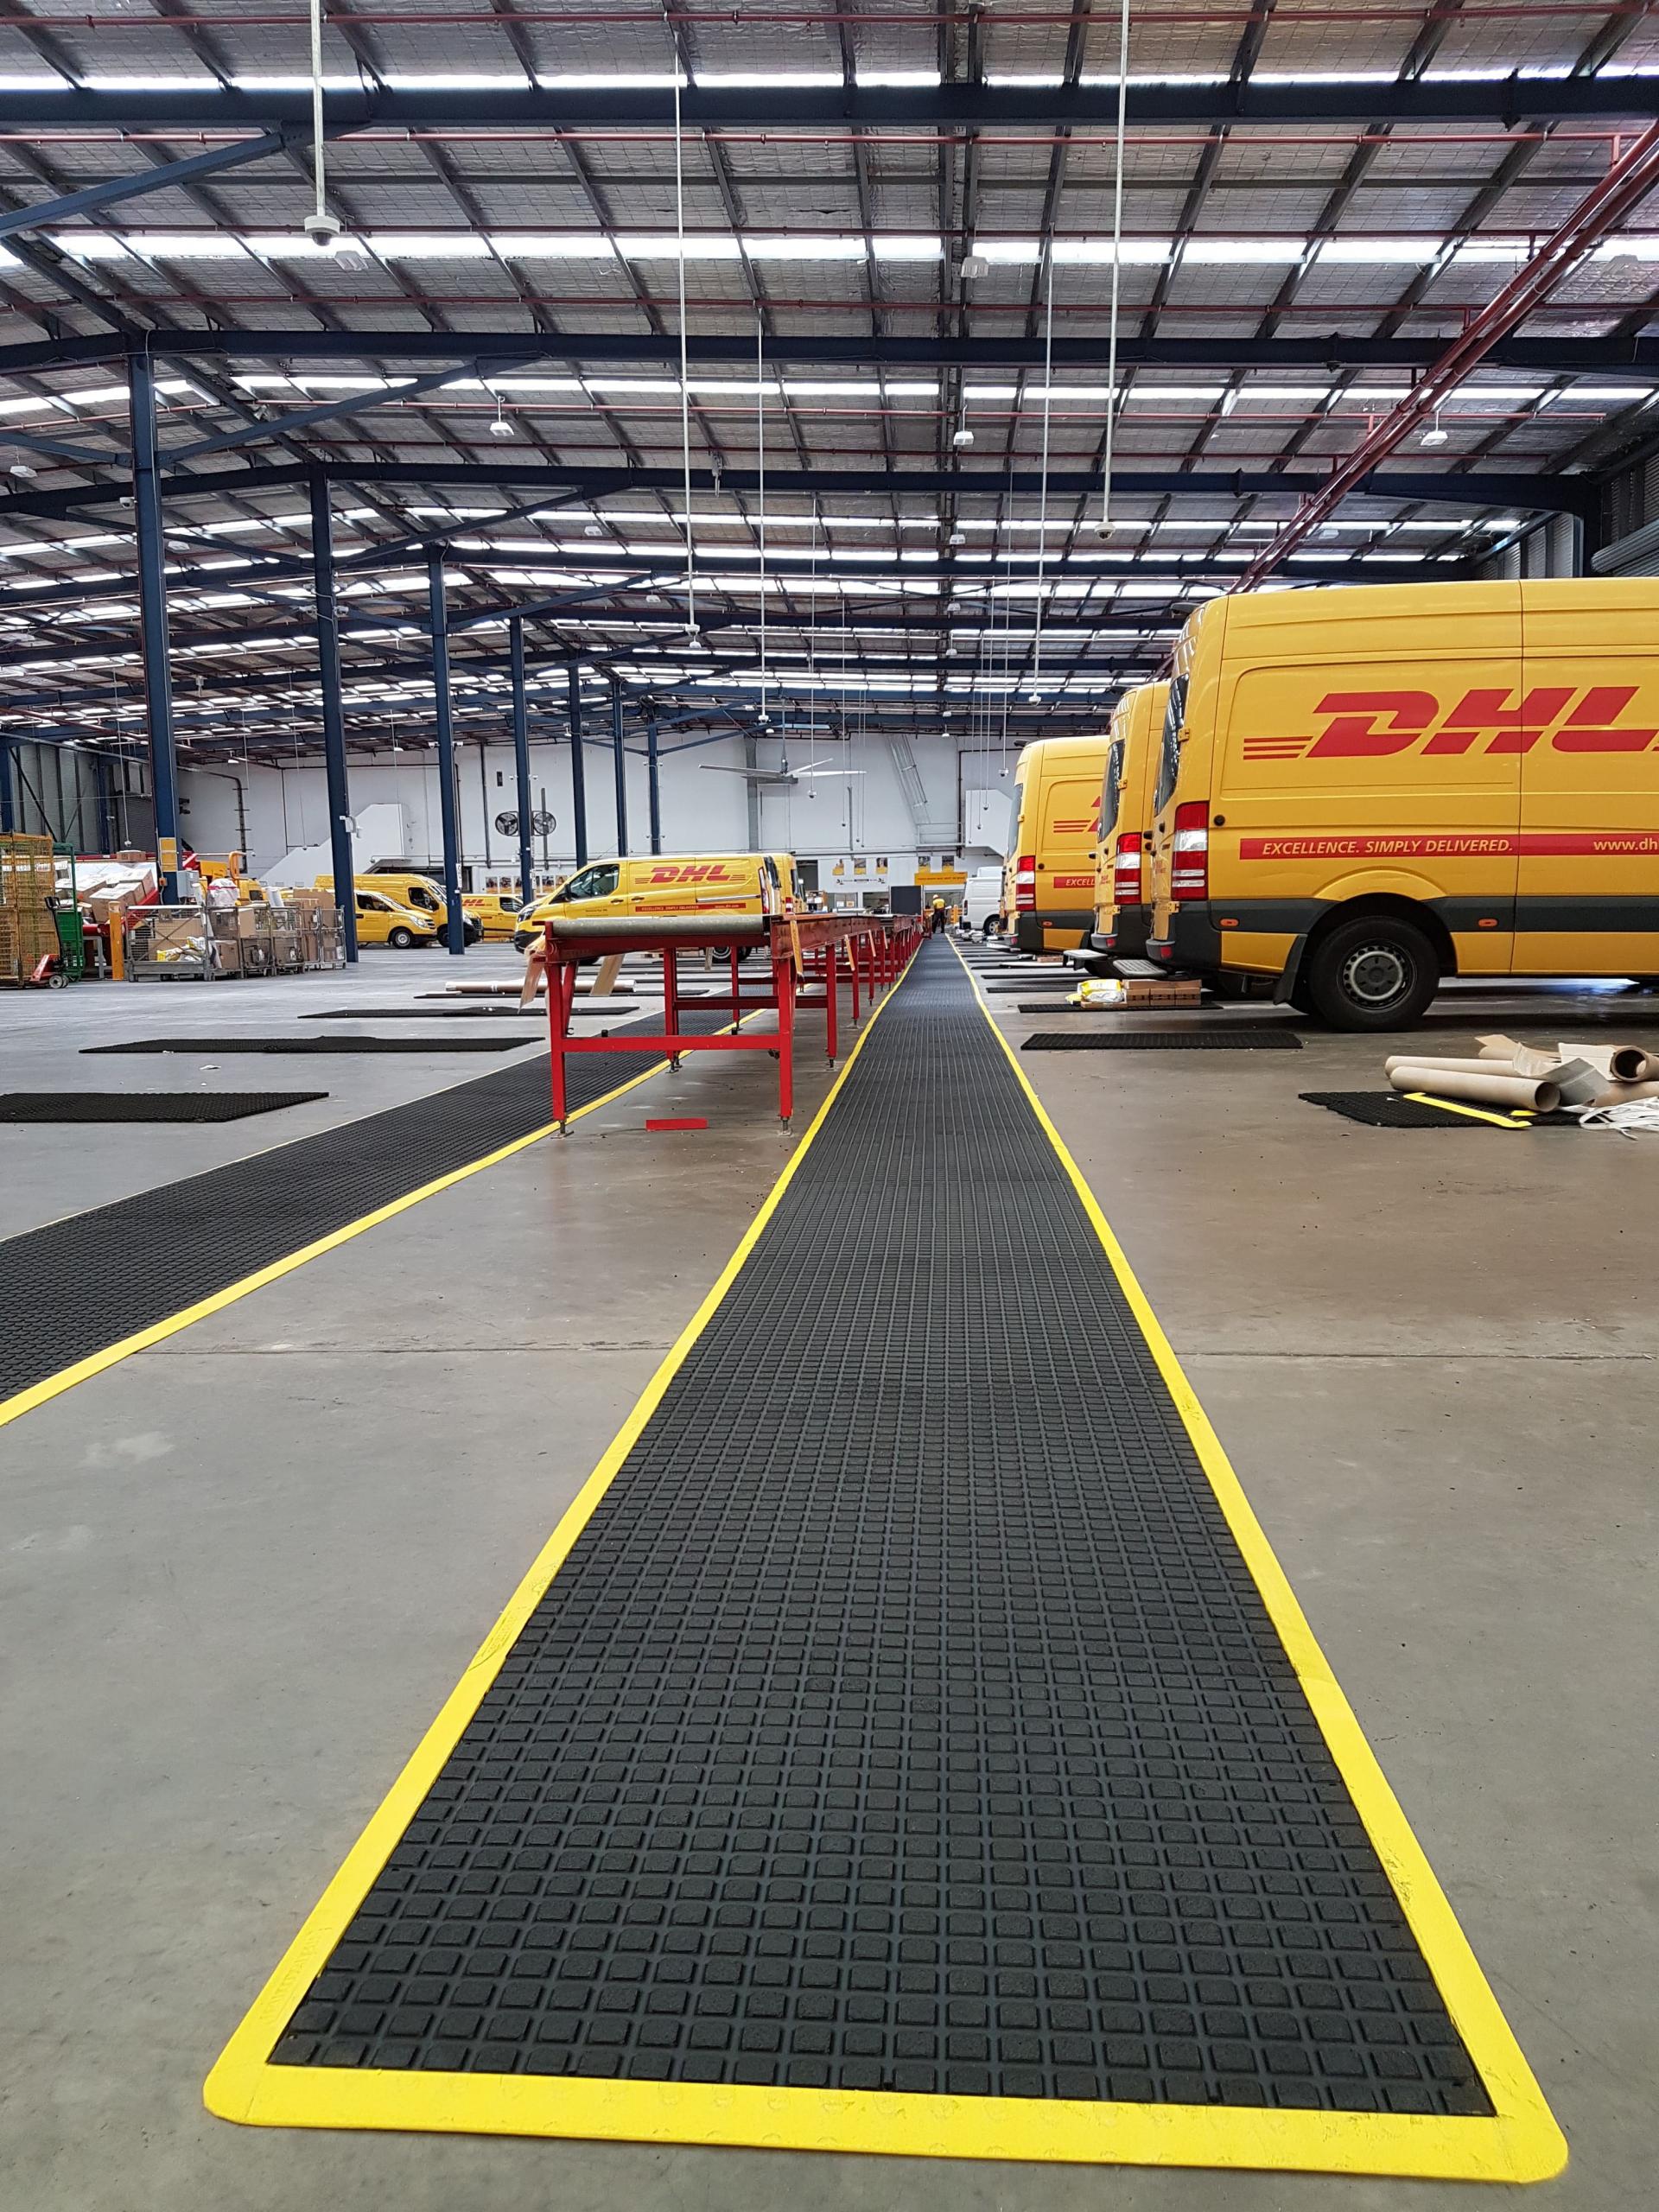 The Air Grid is custom fitted to DHL transit shed walkways to provide anti fatigue and anti slip matting.